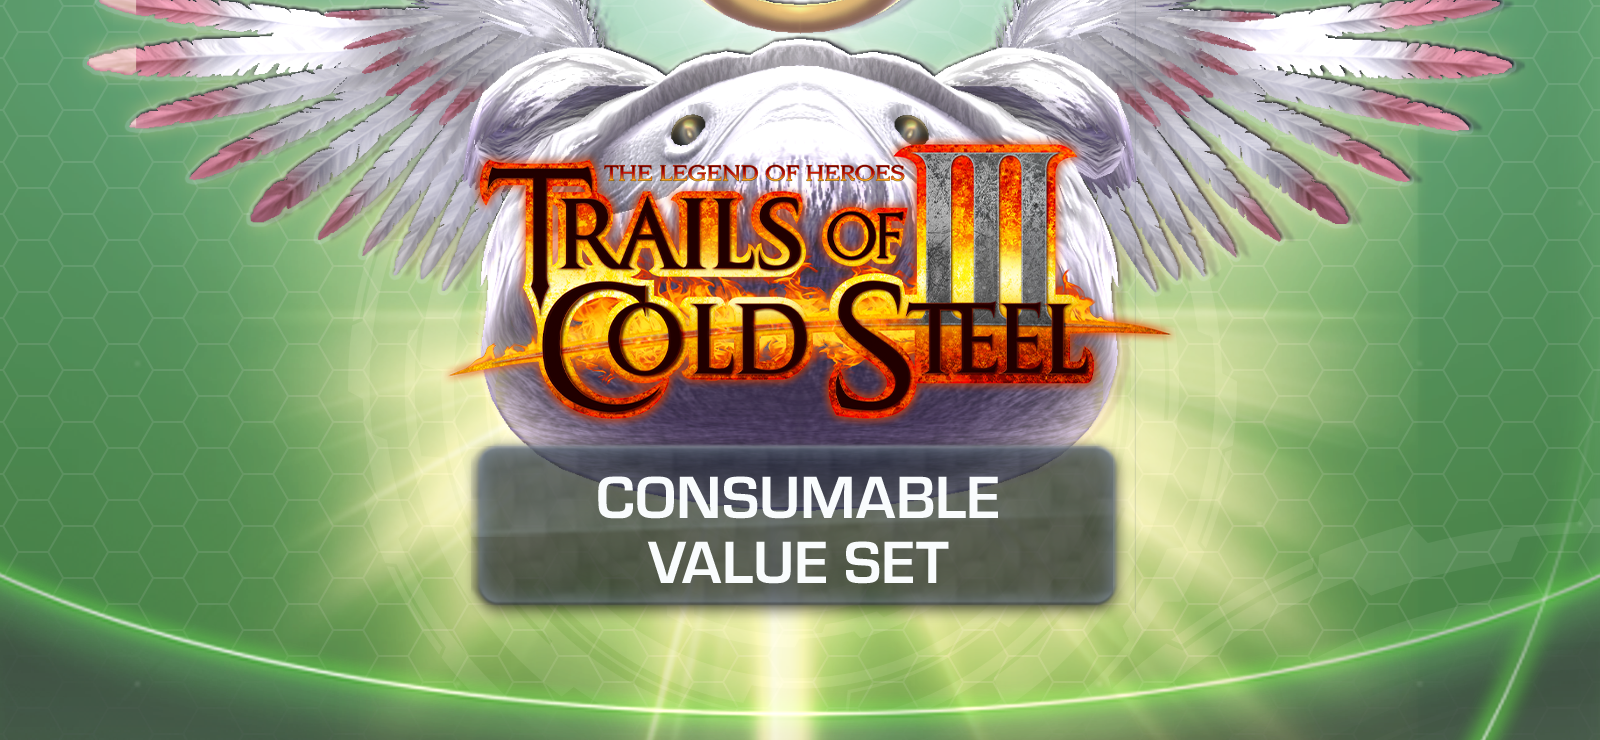 The Legend Of Heroes: Trails Of Cold Steel III - Consumable Value Set